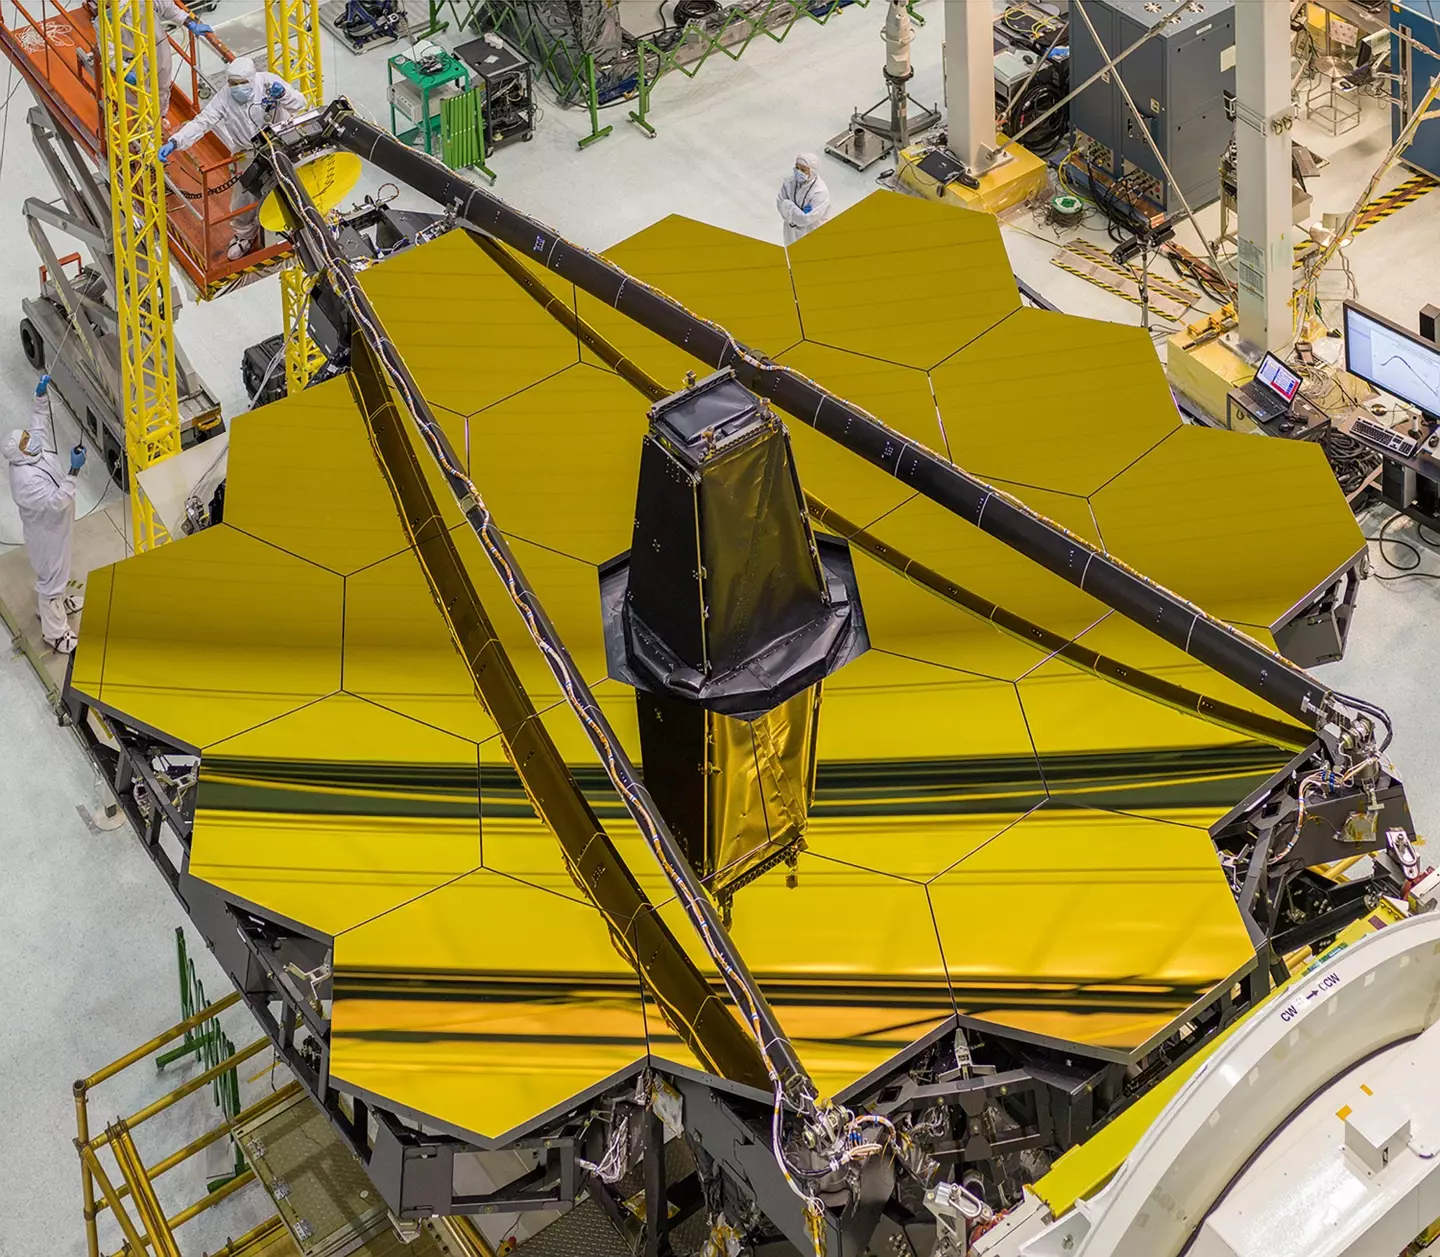 The James Webb Telescope will reveal its first observations this summer.